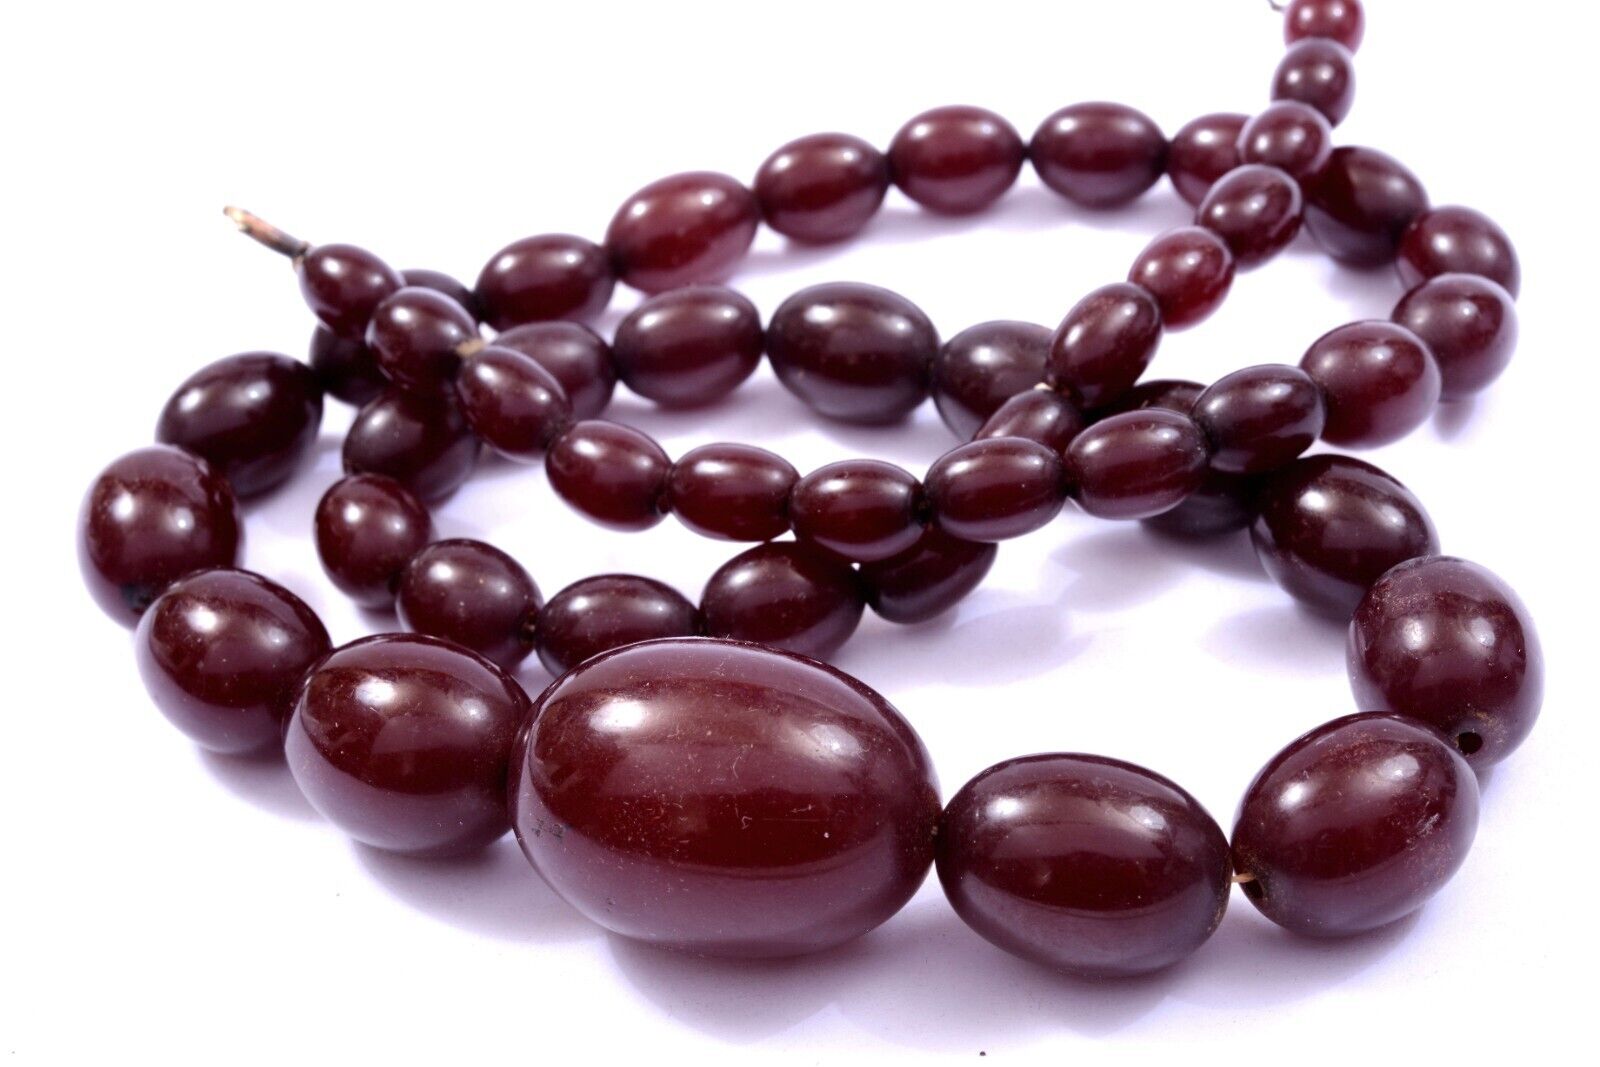 52G Old Dark Cherry Amber Bakelite Faturan Carved Carving 29 mm Bead Necklace